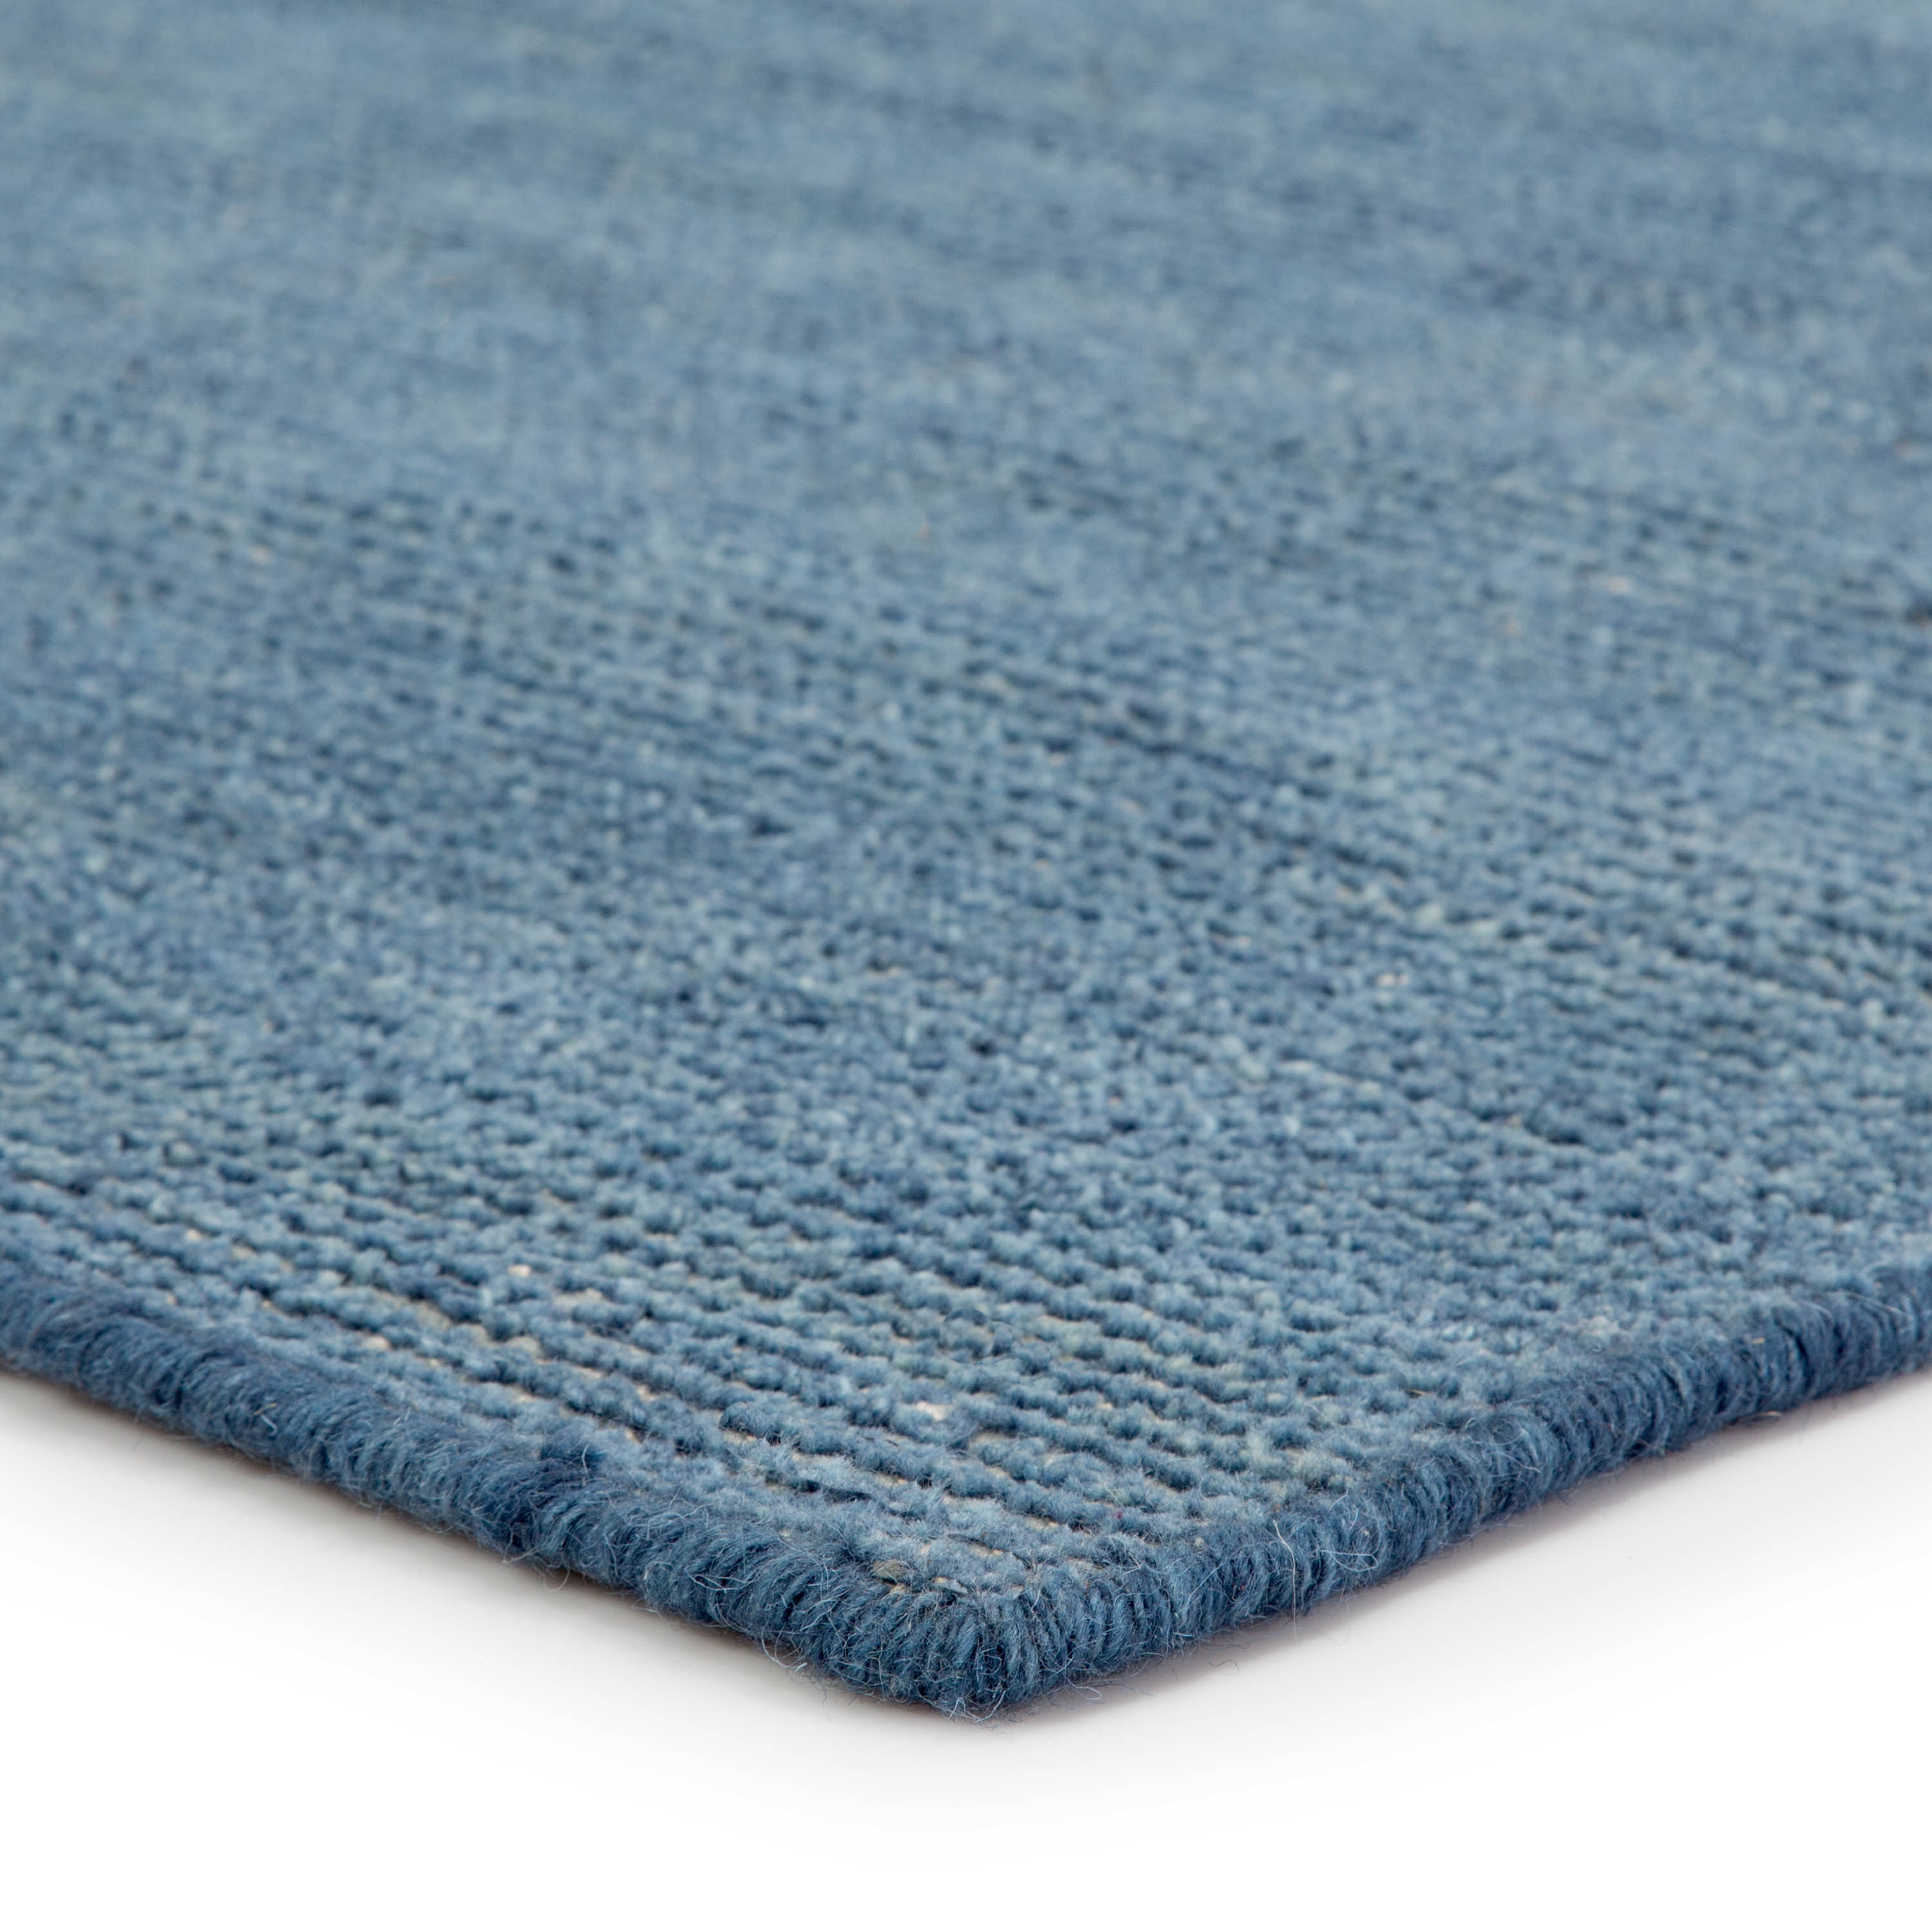 Paramount Hand-Knotted Solid Indigo/ White Area Rug, 5' X 8' - Image 1